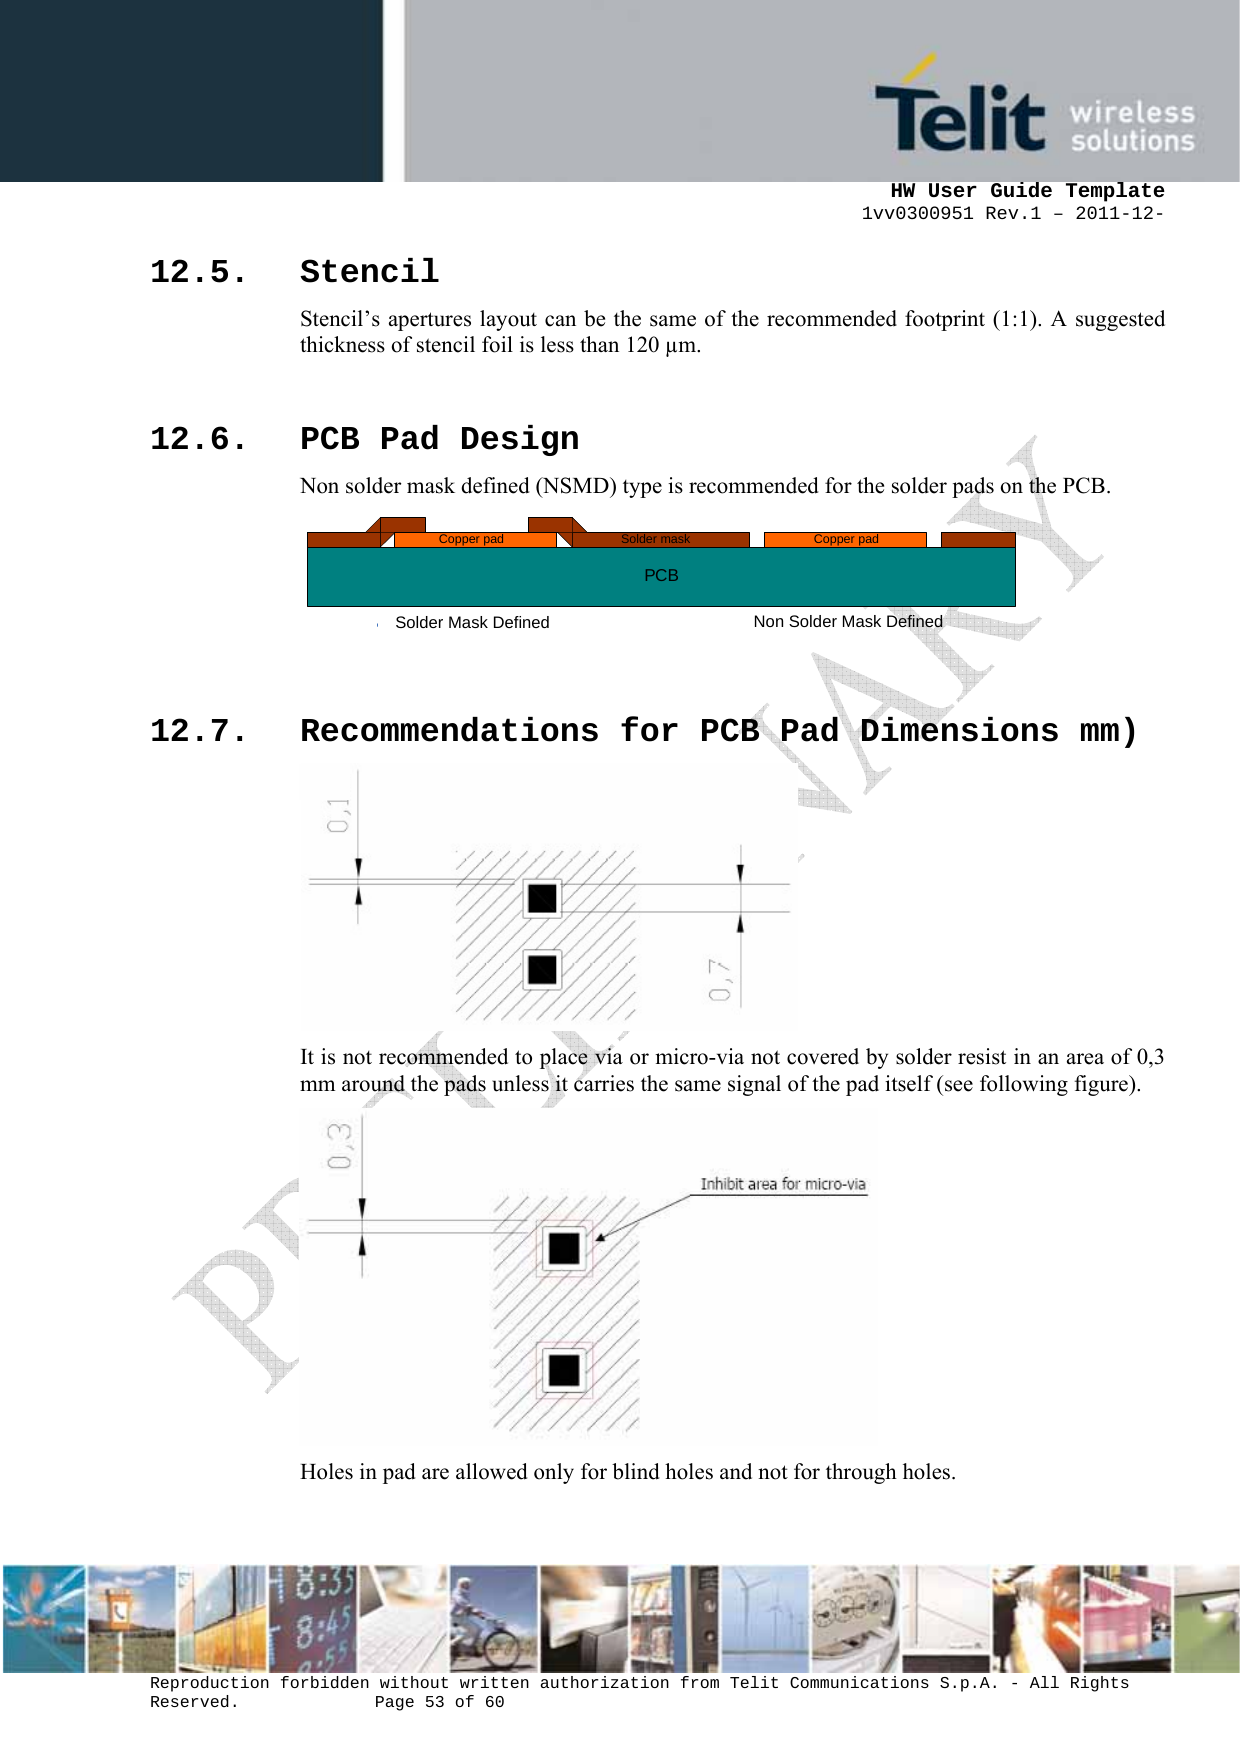      HW User Guide Template 1vv0300951 Rev.1 – 2011-12-  Reproduction forbidden without written authorization from Telit Communications S.p.A. - All Rights Reserved.    Page 53 of 60                                                     12.5. Stencil Stencil’s apertures layout can be the same of the recommended footprint (1:1). A suggested thickness of stencil foil is less than 120 µm.  12.6. PCB Pad Design Non solder mask defined (NSMD) type is recommended for the solder pads on the PCB. PCBSolder maskCopper padSolder Mask DefinedCopper padNon Solder Mask Defined   12.7. Recommendations for PCB Pad Dimensions mm)  It is not recommended to place via or micro-via not covered by solder resist in an area of 0,3 mm around the pads unless it carries the same signal of the pad itself (see following figure).  Holes in pad are allowed only for blind holes and not for through holes.  